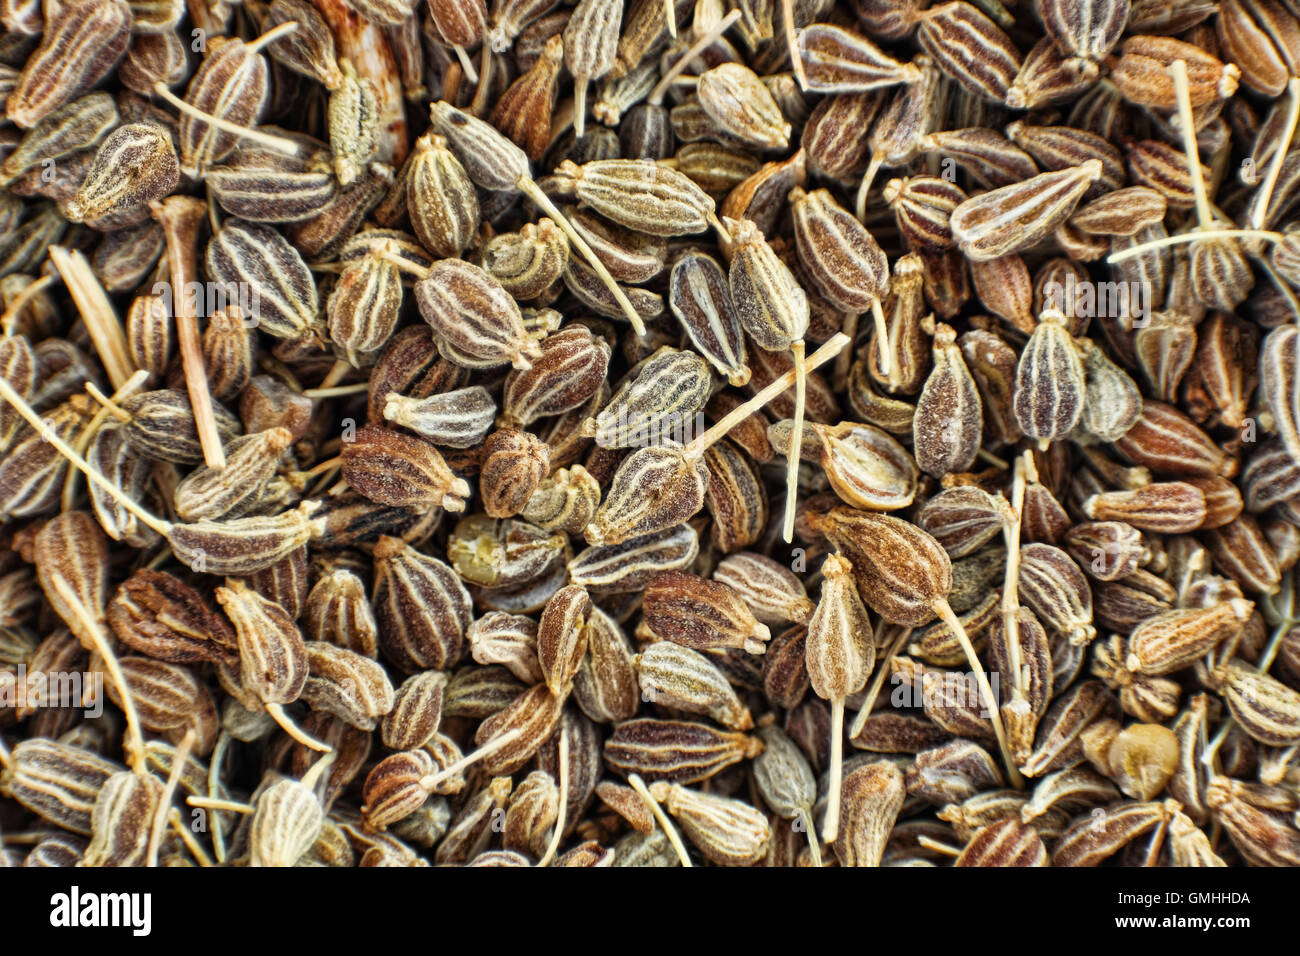 Dried anise seeds taken closeup suitable as food background. Stock Photo